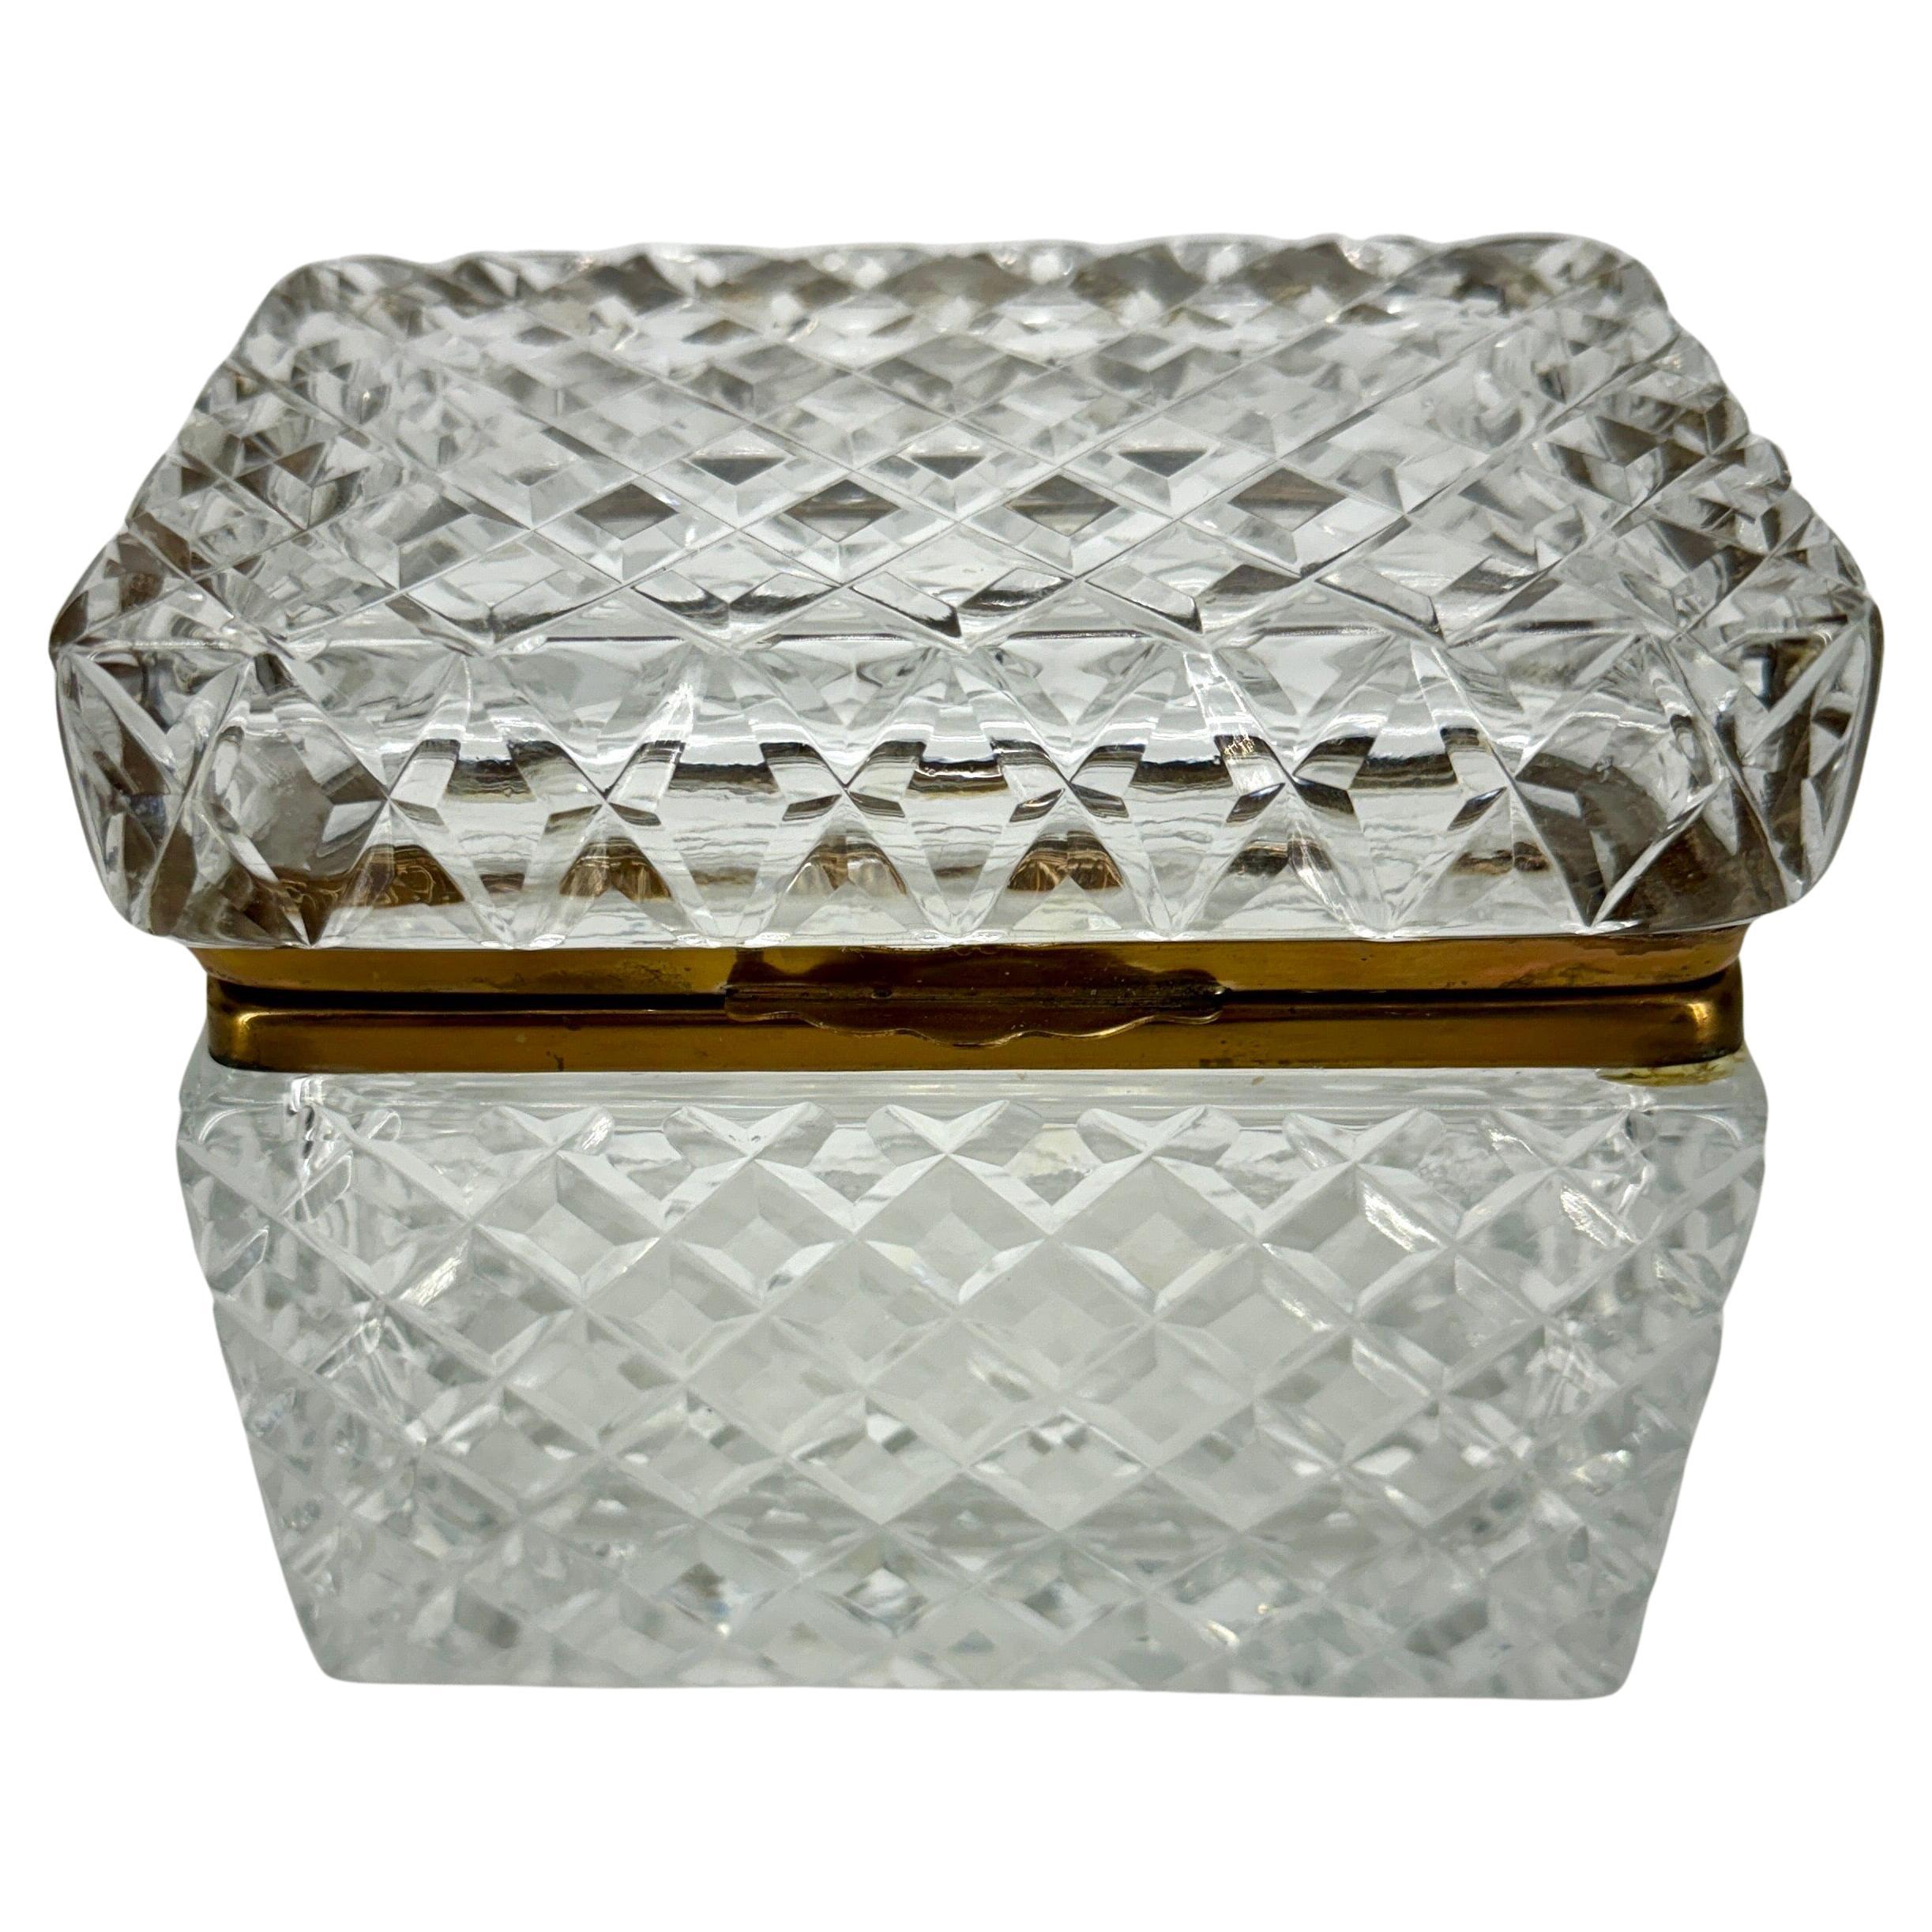 French antique rectangular cut crystal and brass jewelry box, vanity box.

A beautiful cut crystal and brass jewelry or vanity box. This small cut crystal box is perfect as a desk accessory, a candy dish, a vanity box or jewelry box. The lovely